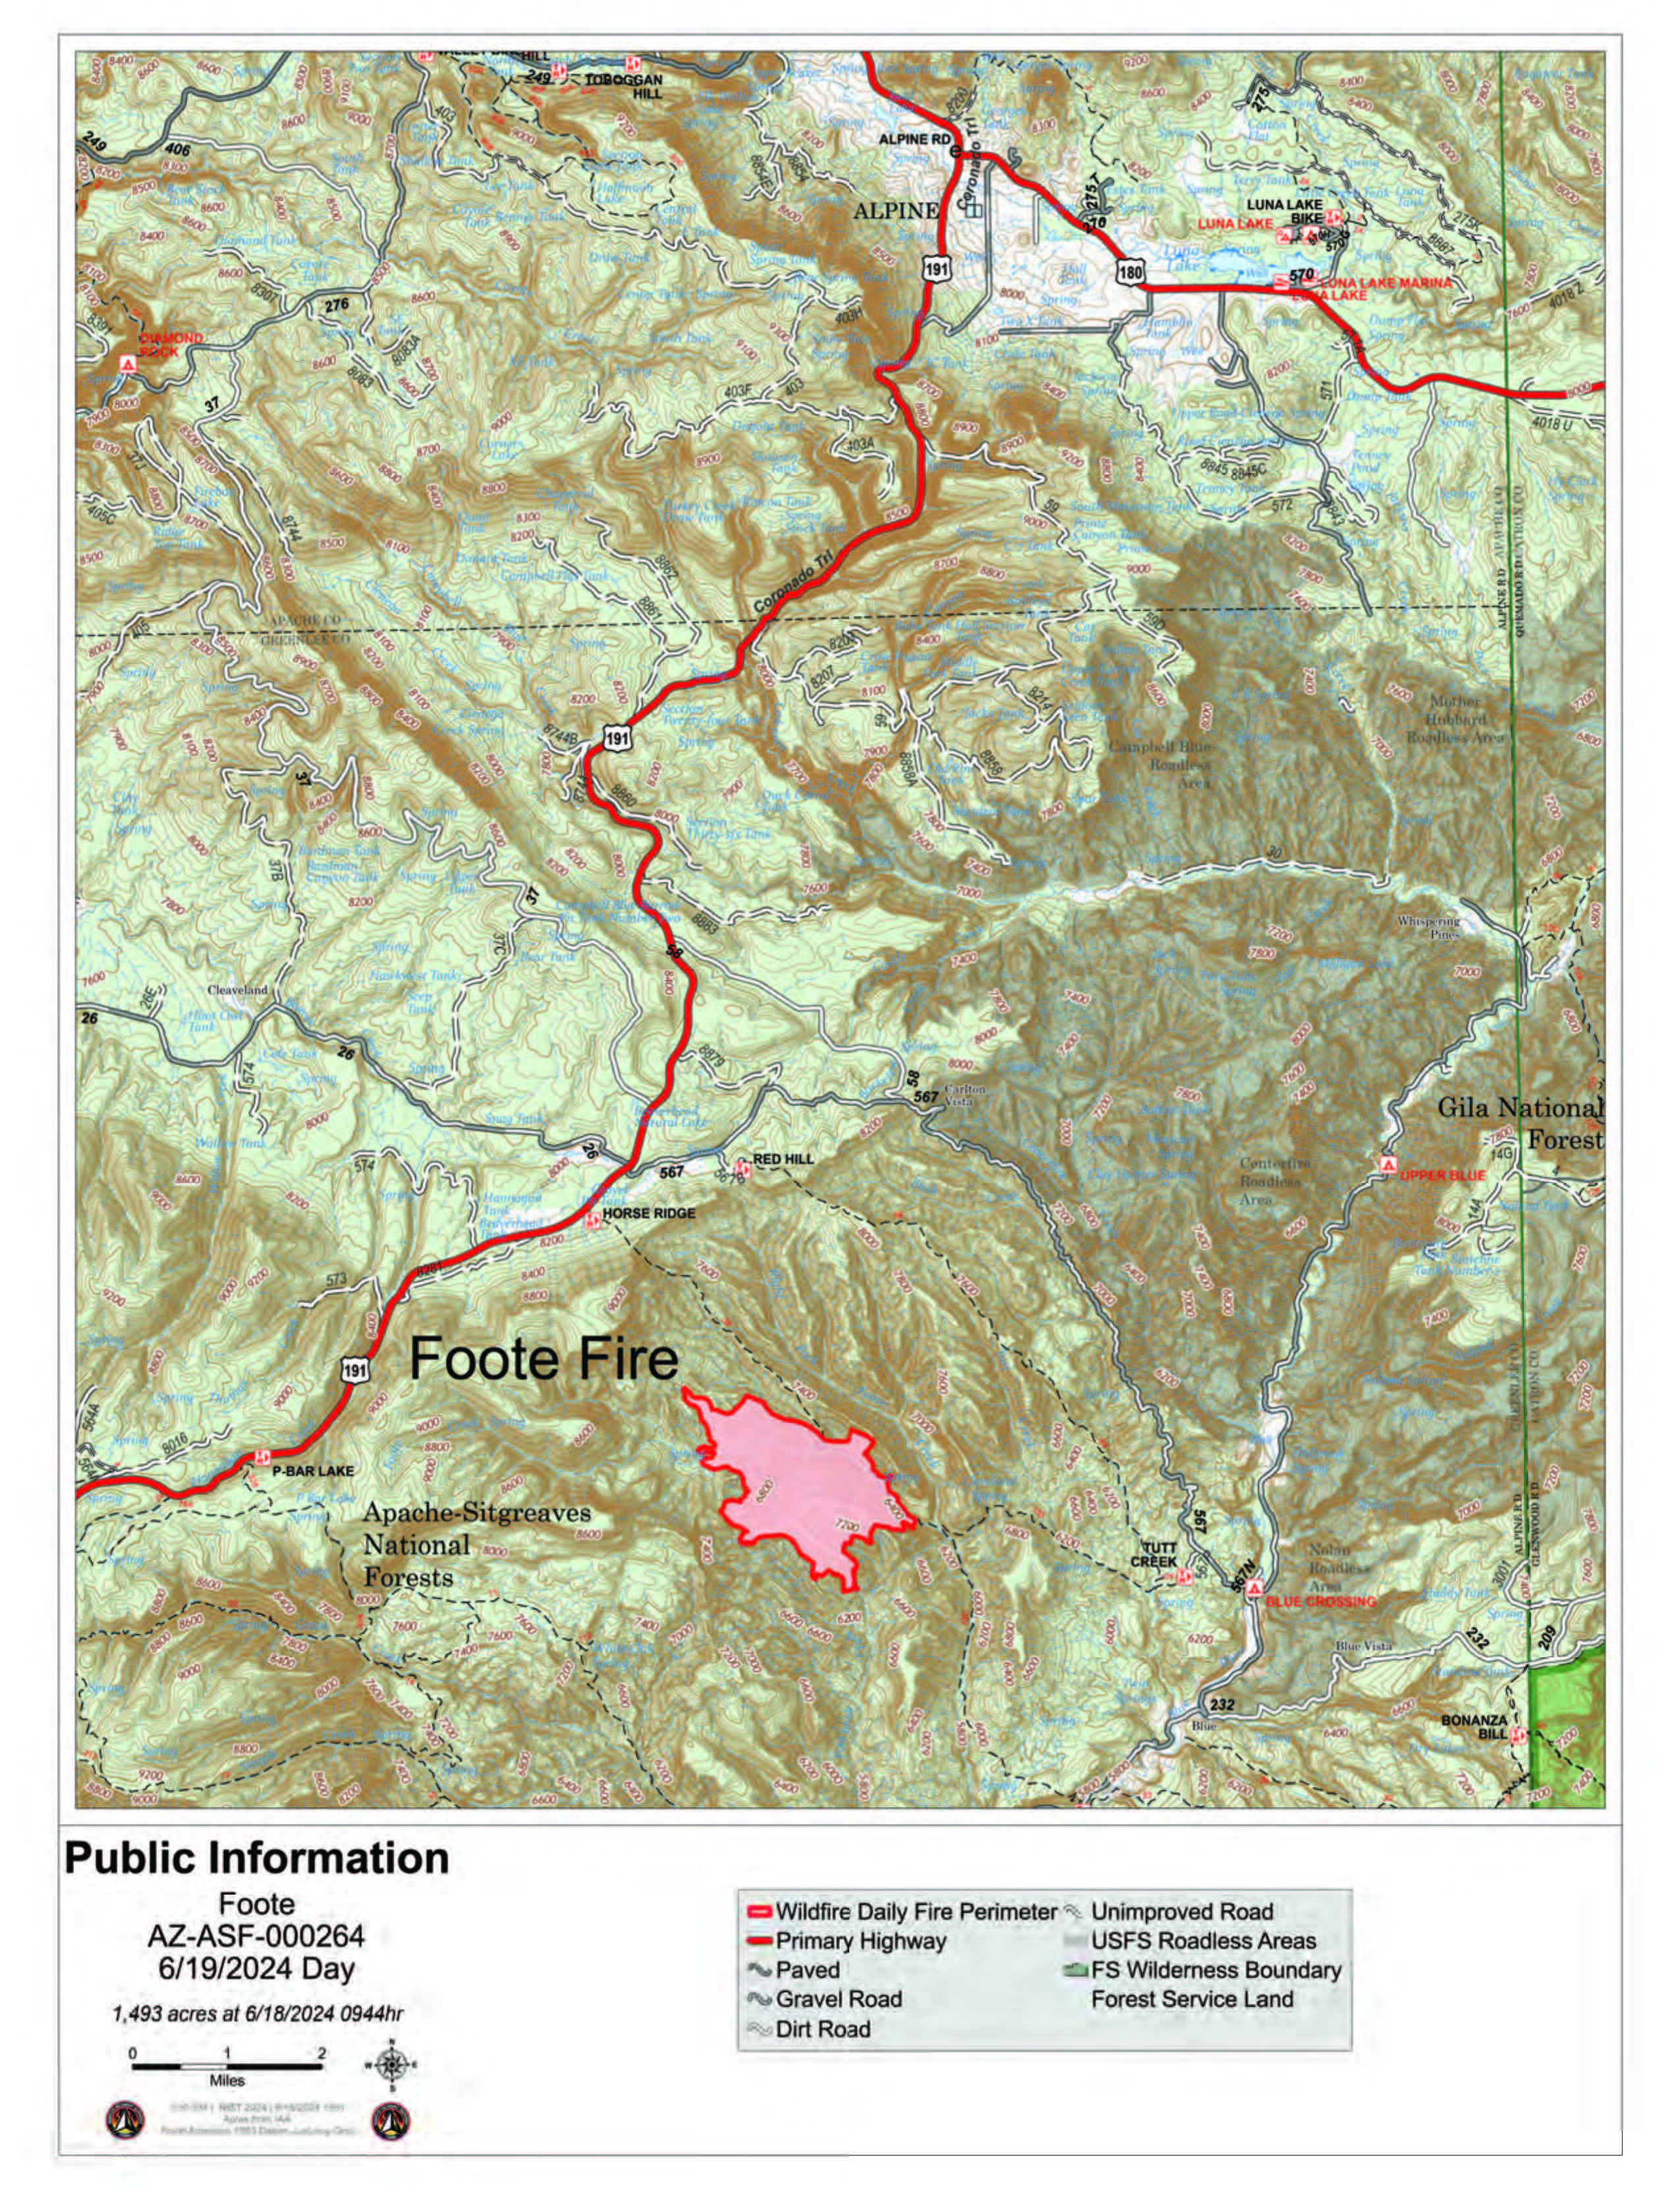 This is a map of the Foote Fire on June 19 2024